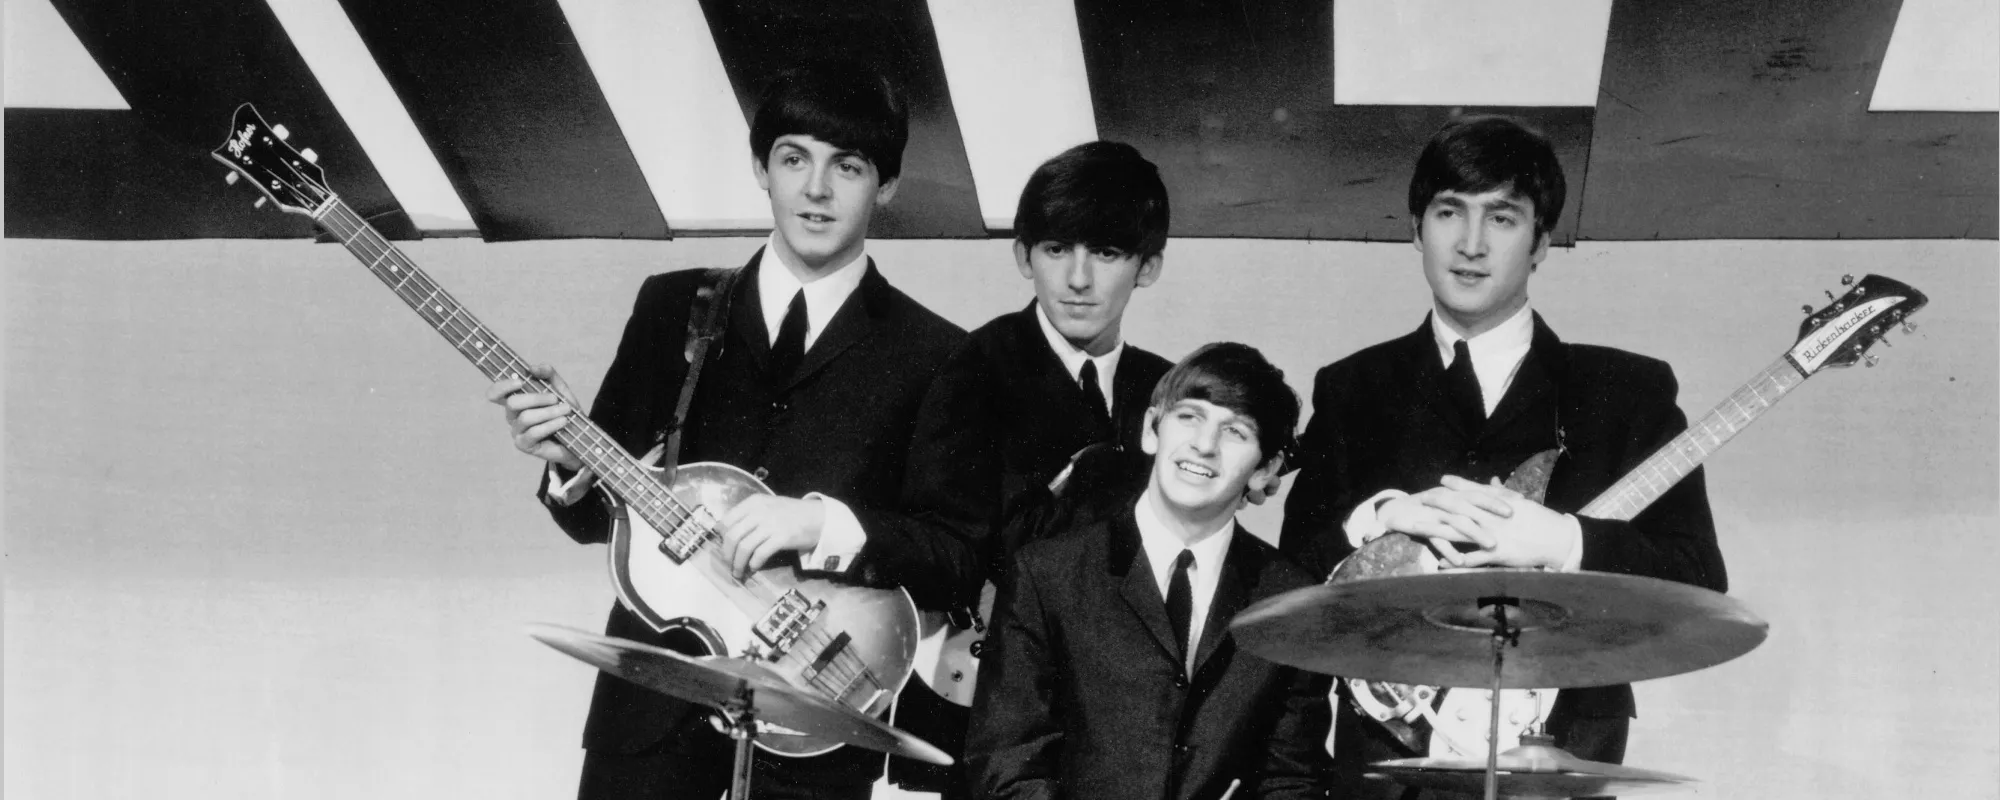 6 Iconic British Invasion Bands from the 1960s